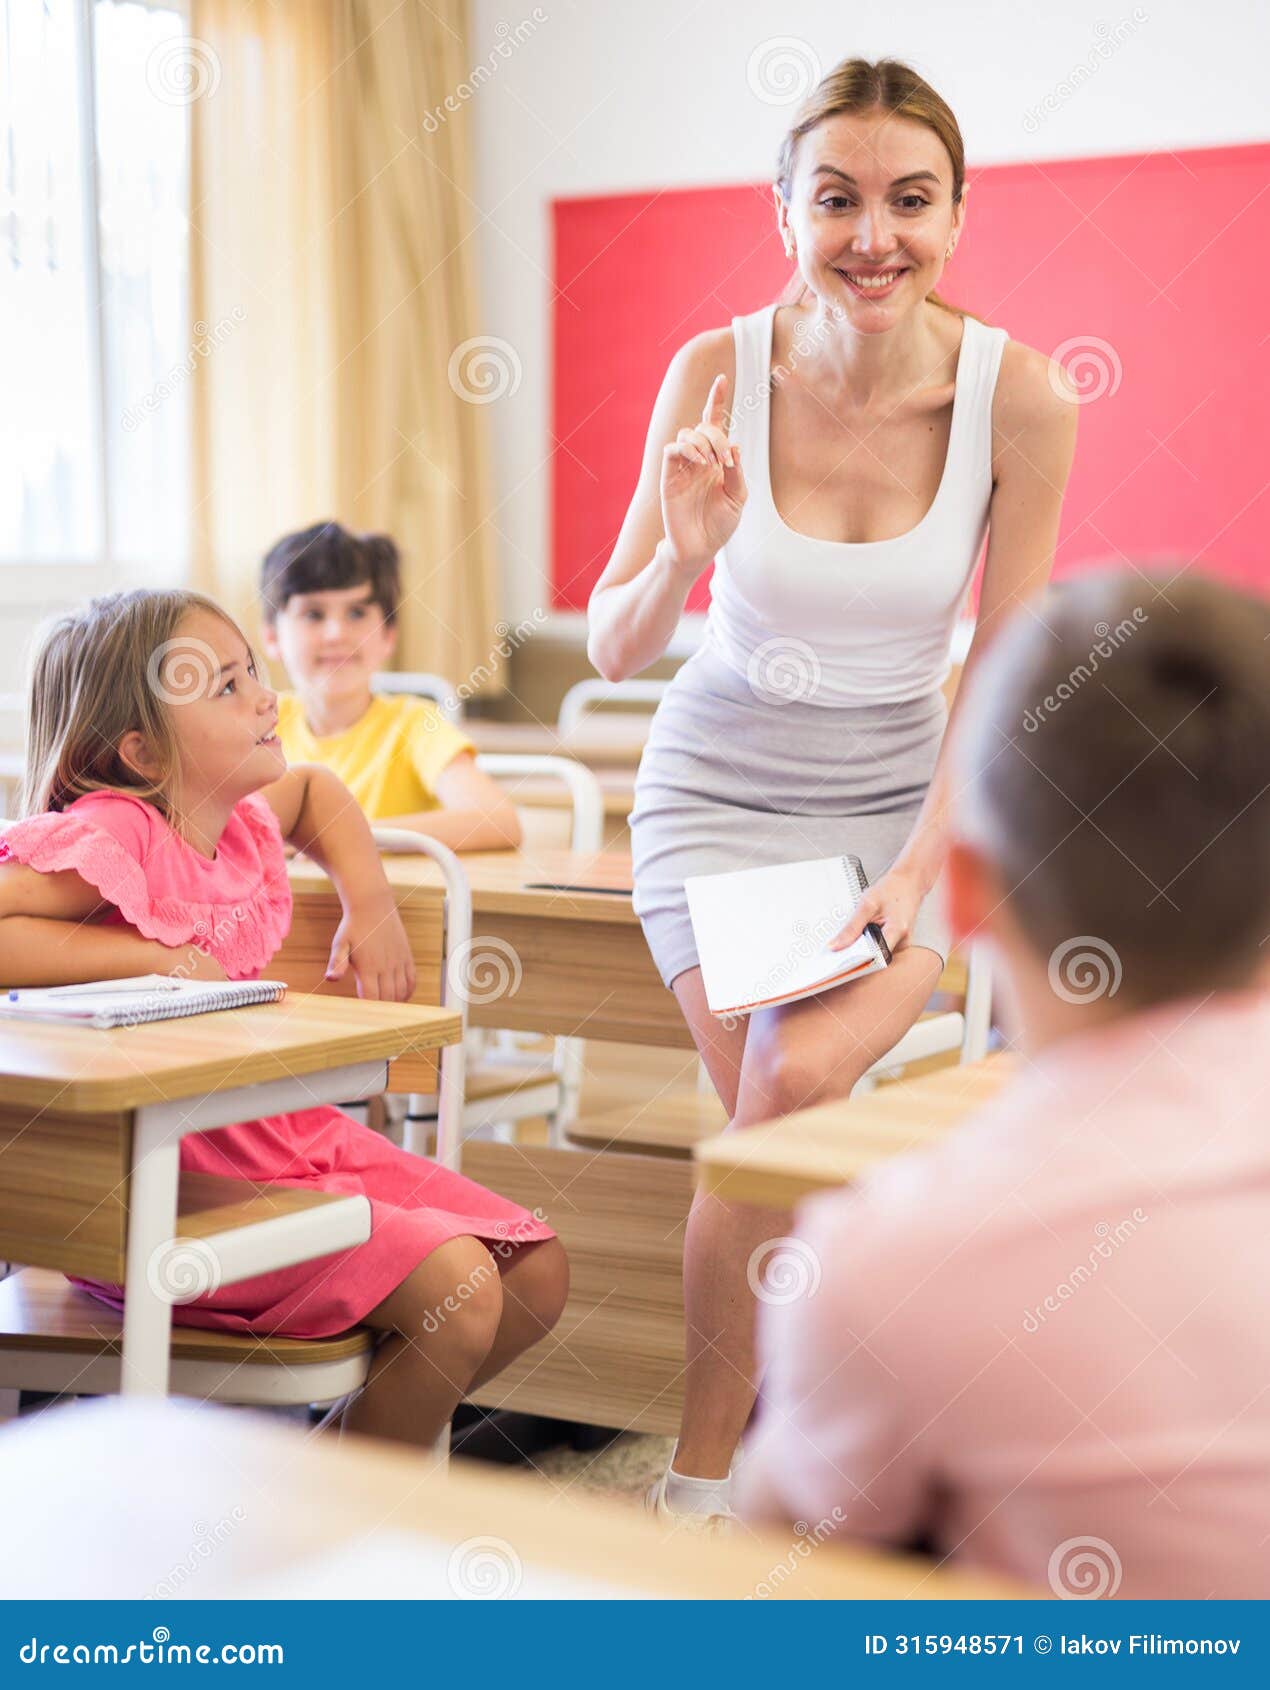 portrait of smiling woman teacher during lesson with tweens